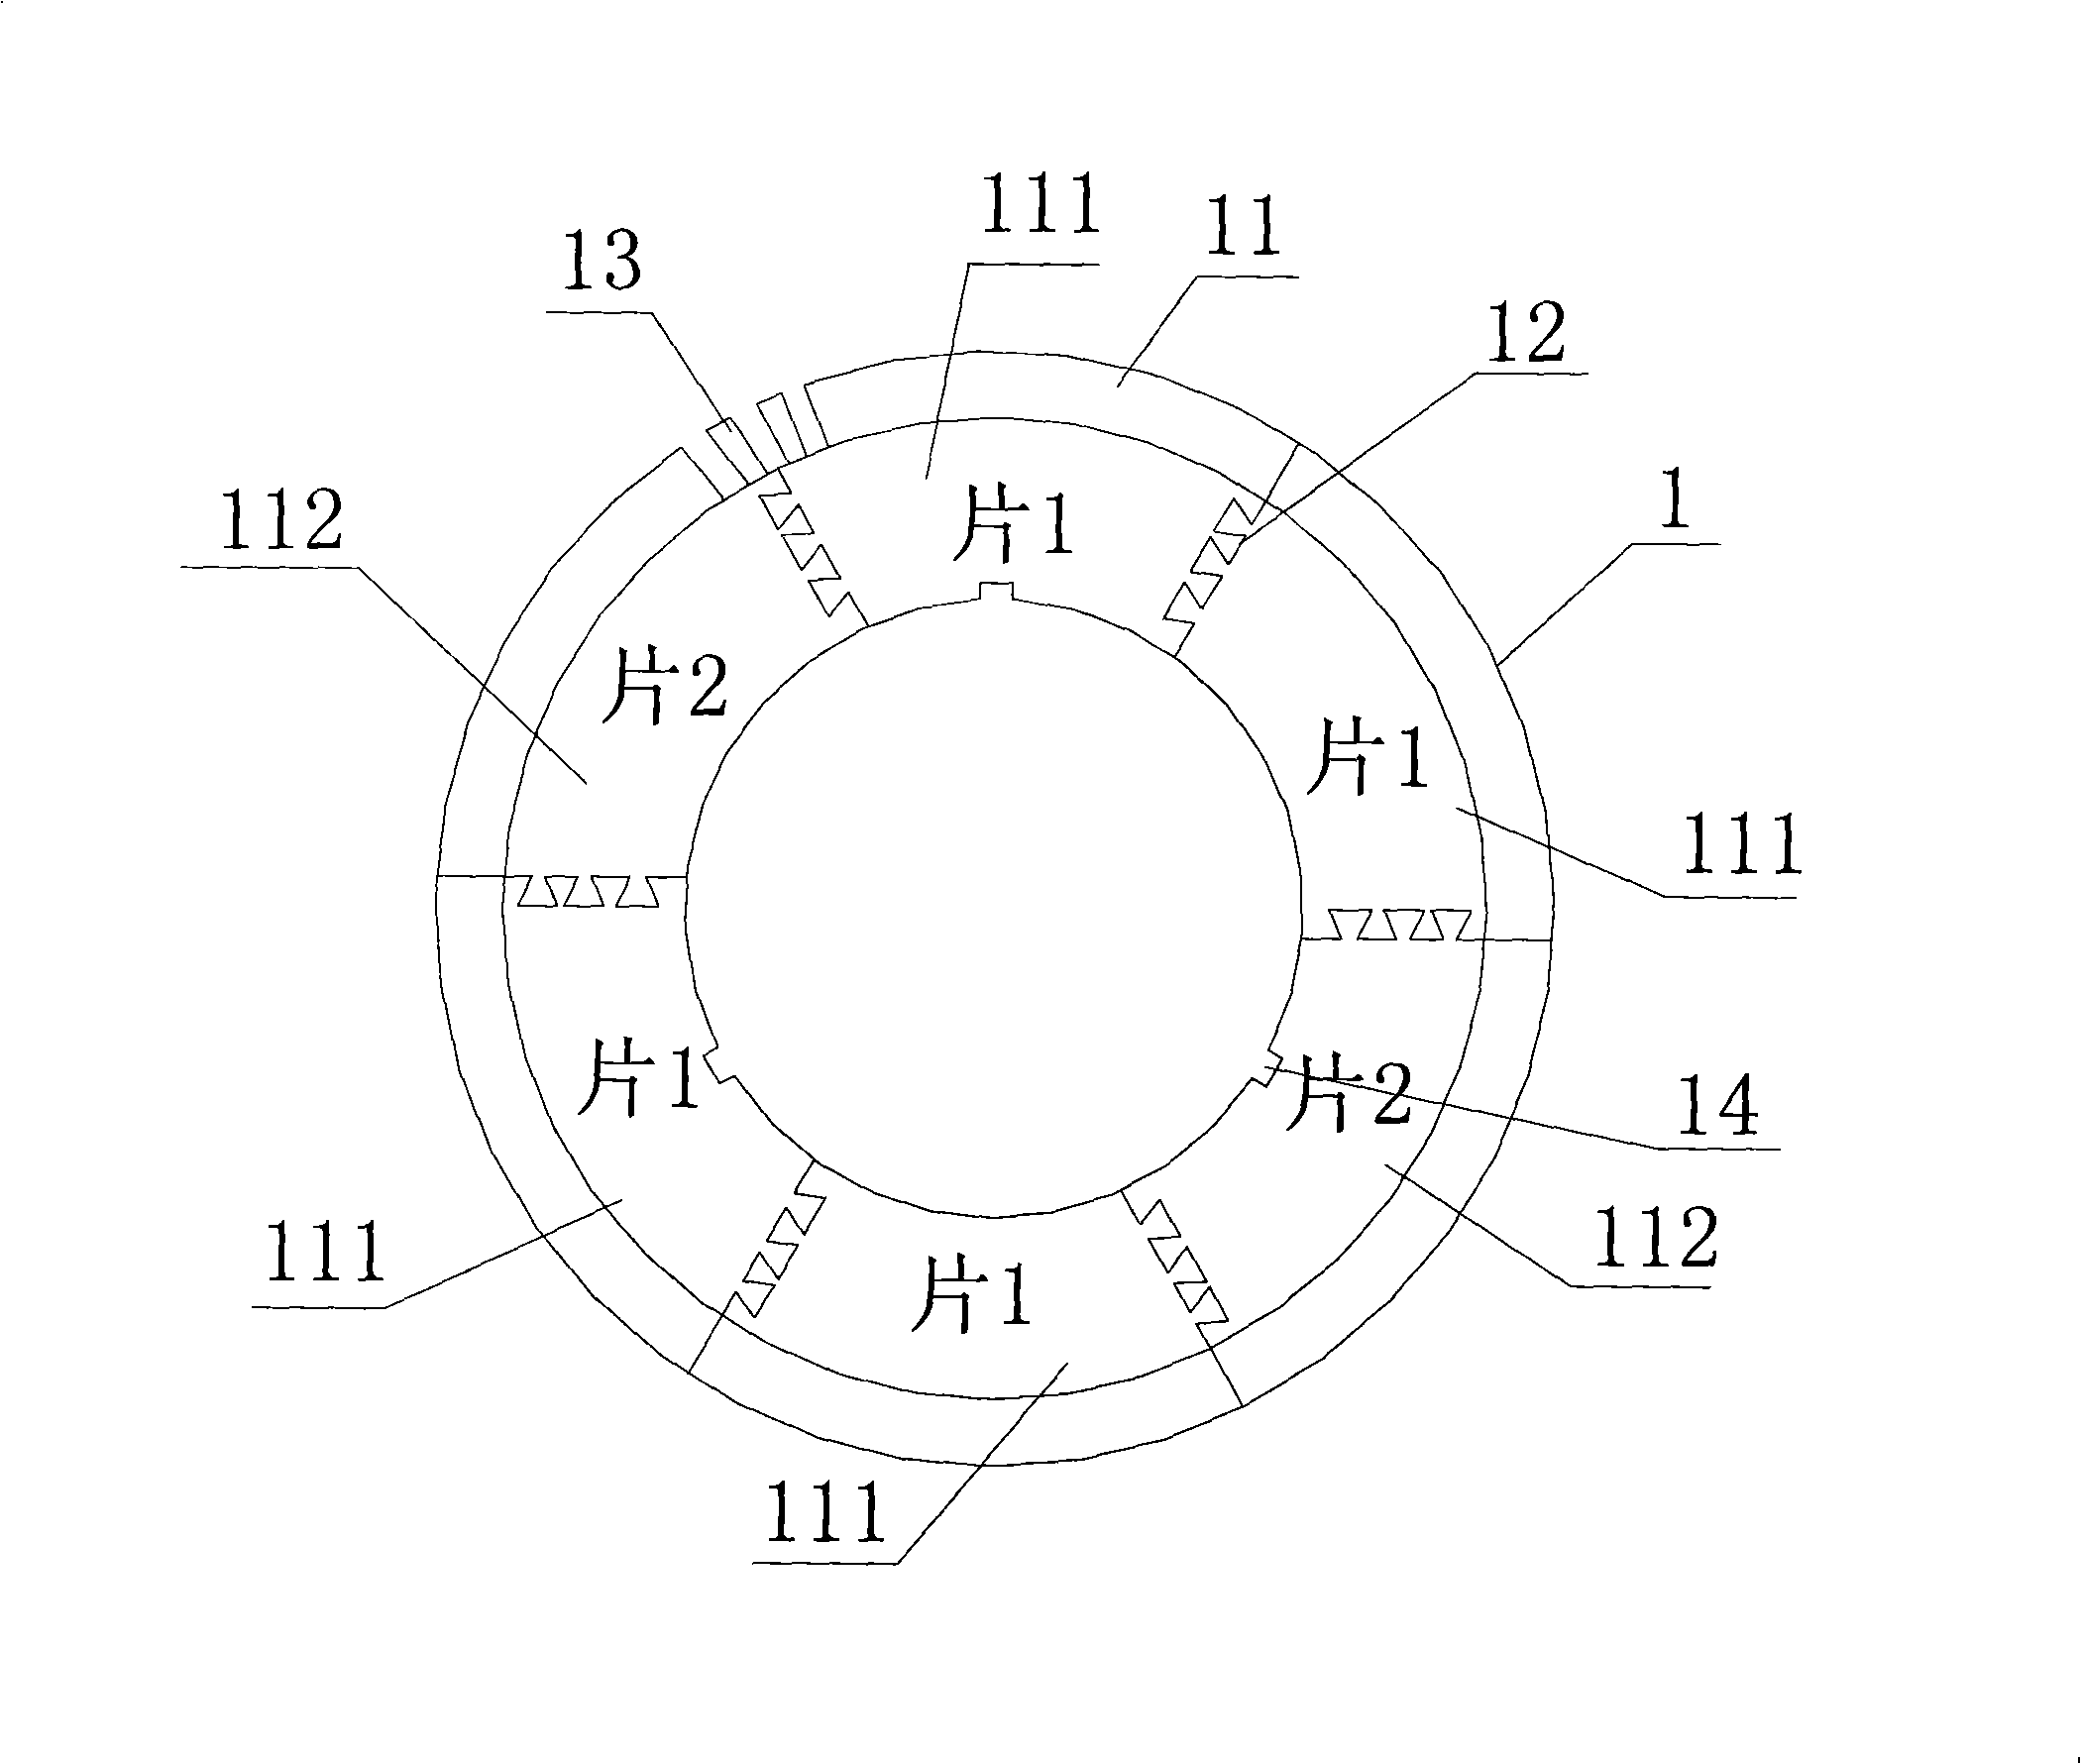 Chaining fanning strip for large-medium type motor and manufacturing method thereof